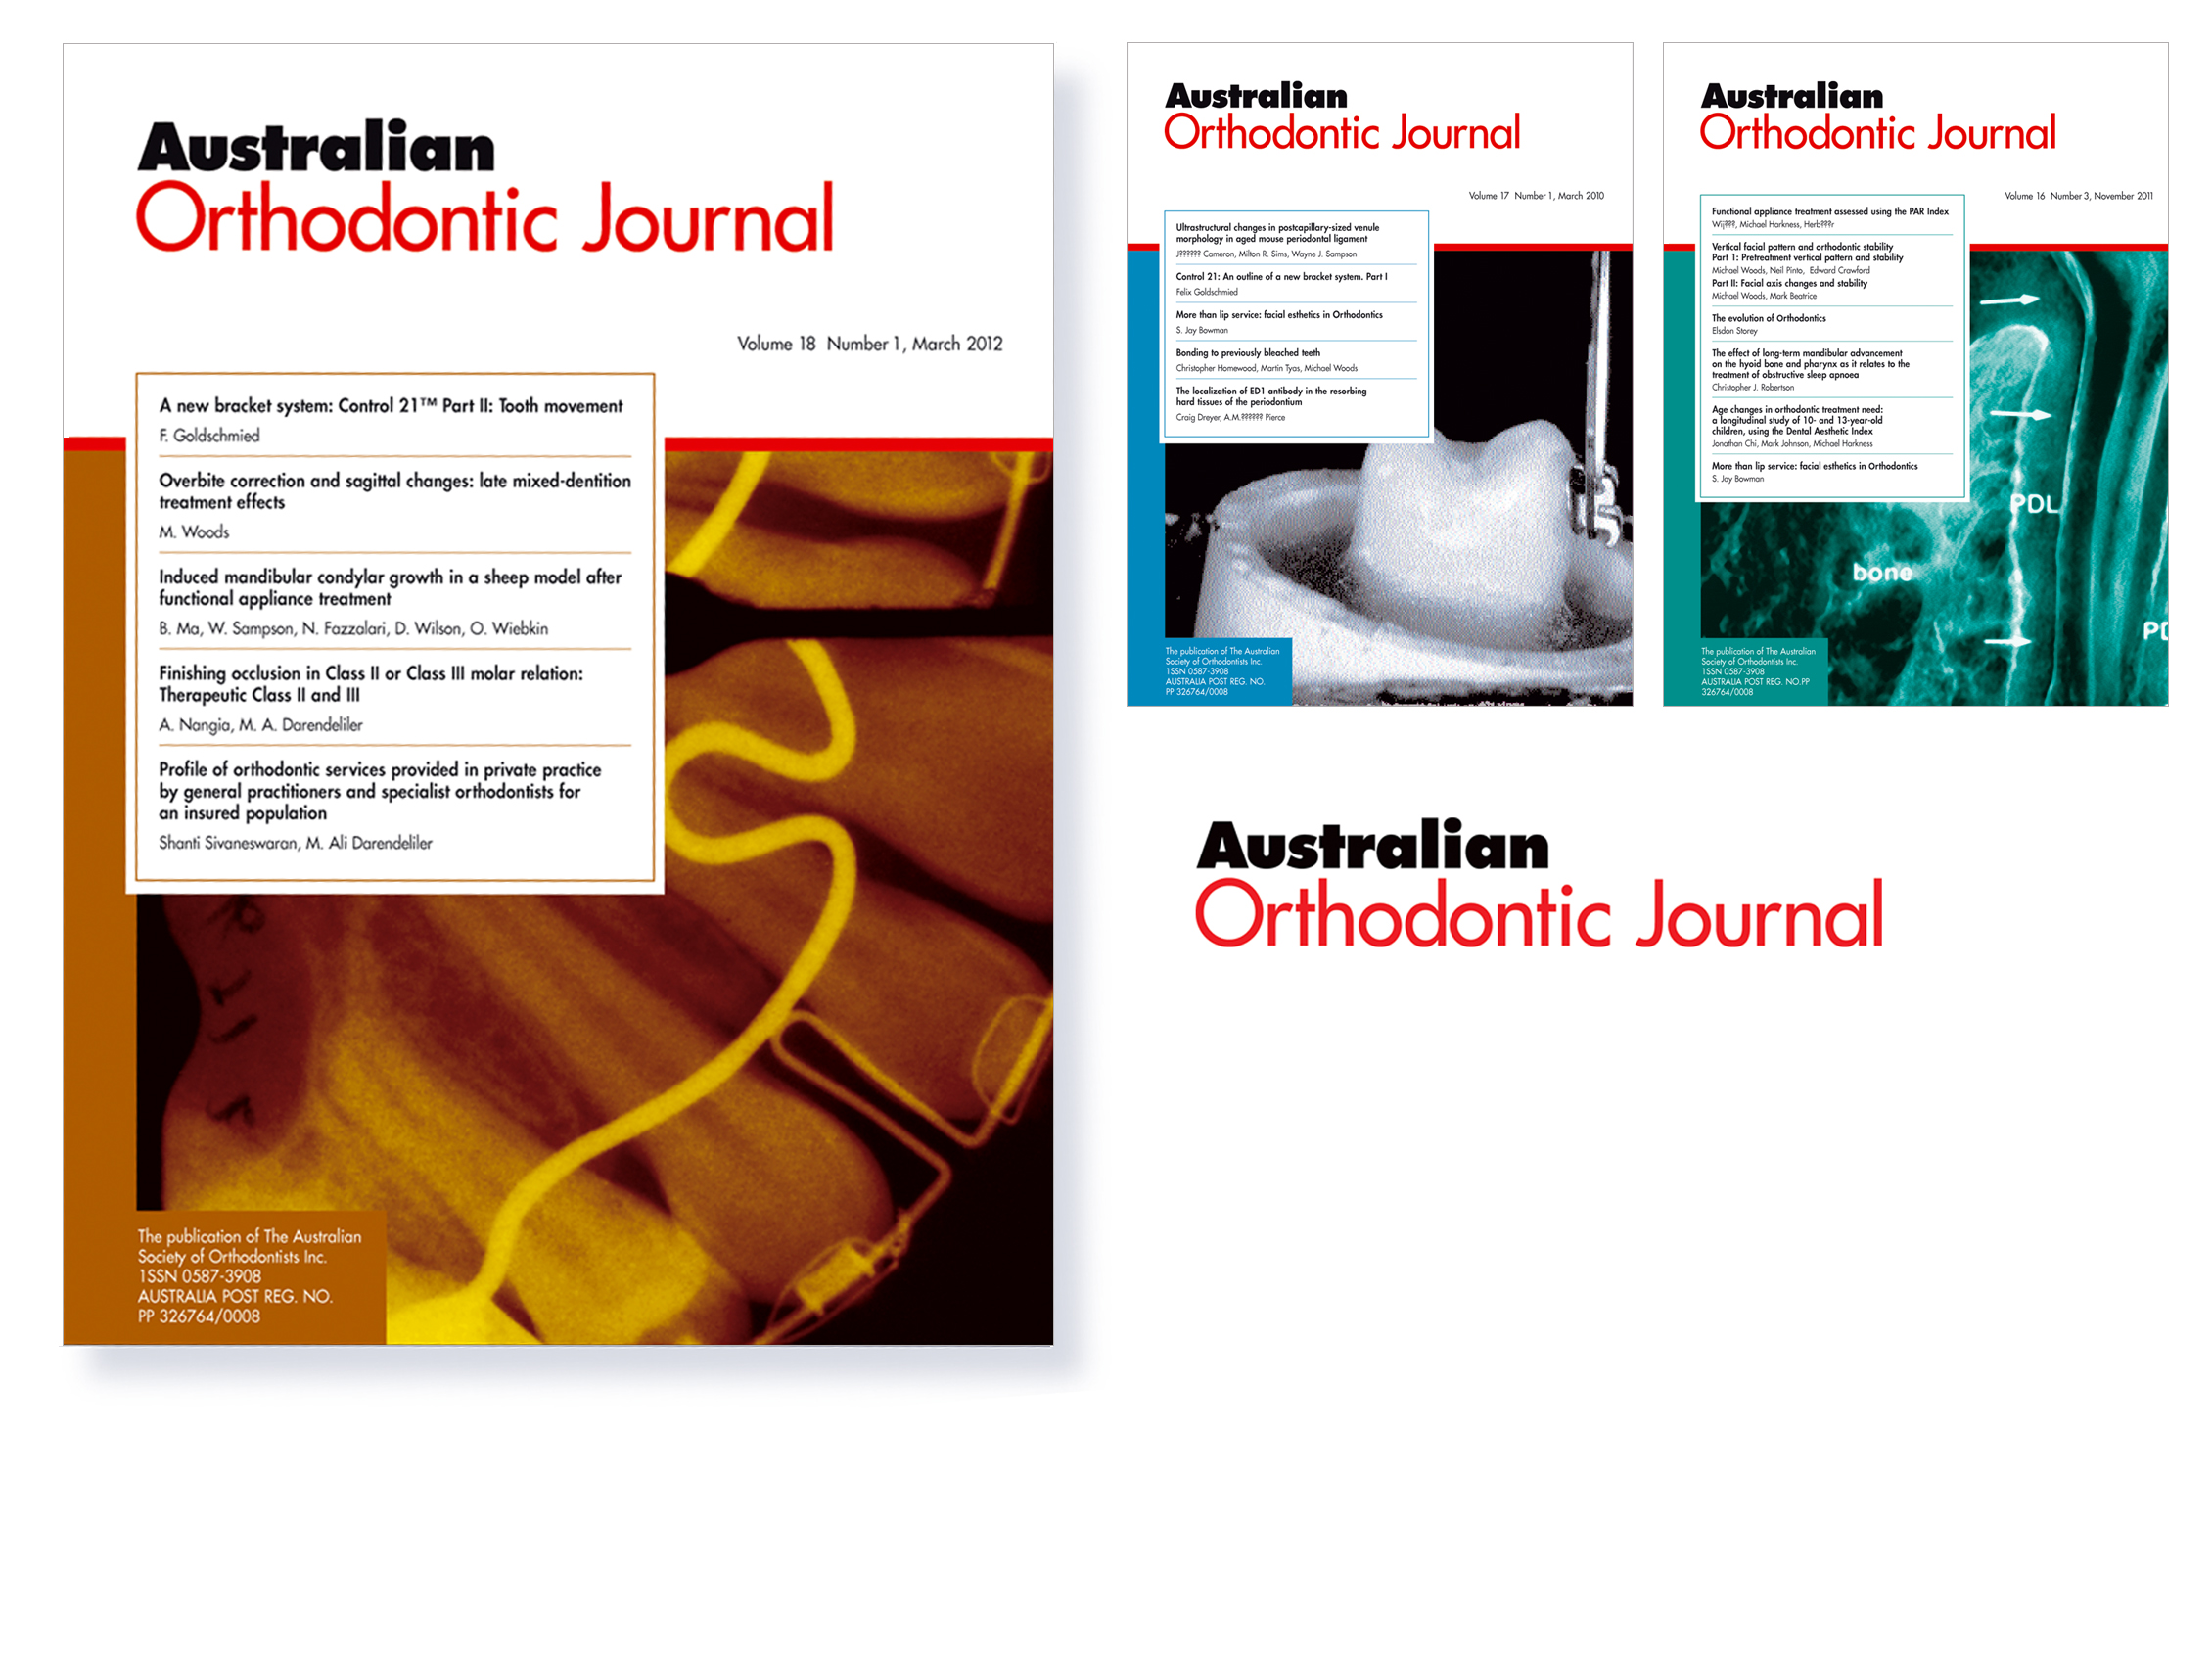  Journal covers and masthead CLIENT: The Australian Society of Orthodontists BRIEF: Design and produce the quarterly journal of peer reviewed research and case studies, including a new masthead, cover and internal spreads. 